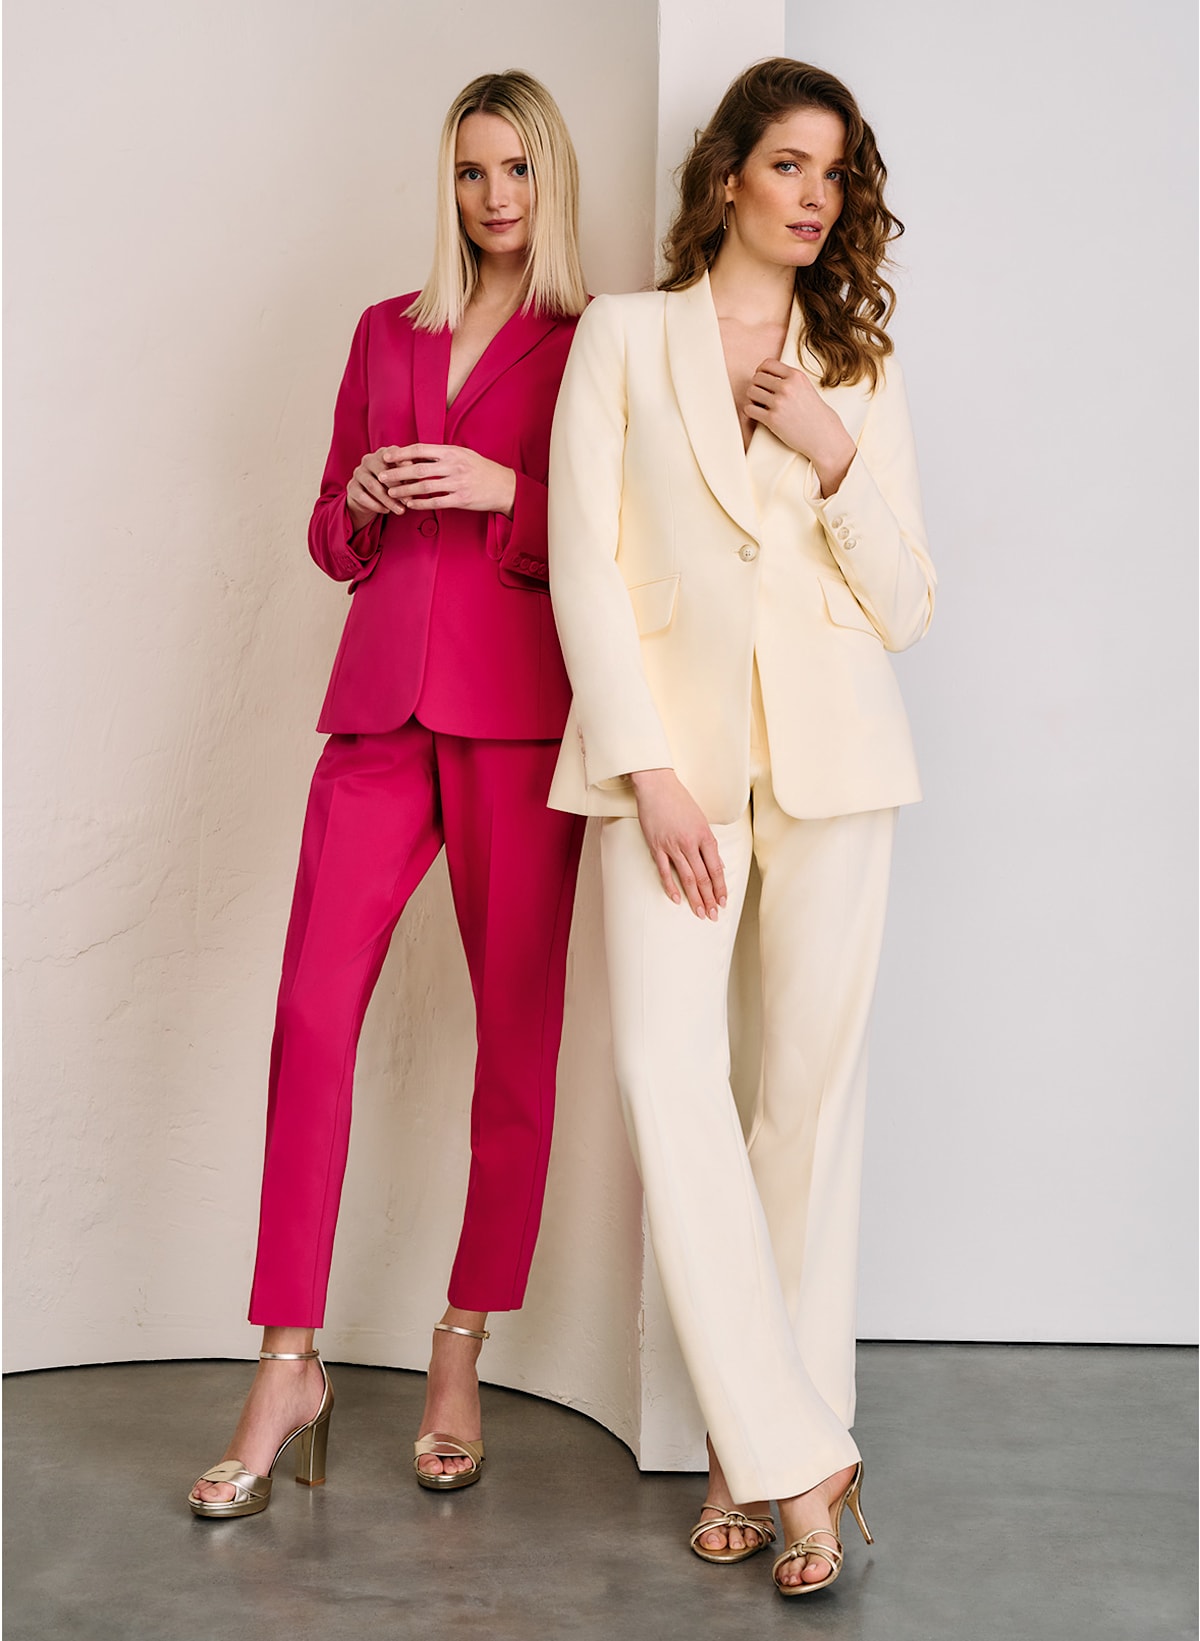 Women wearing Phase Eight suits